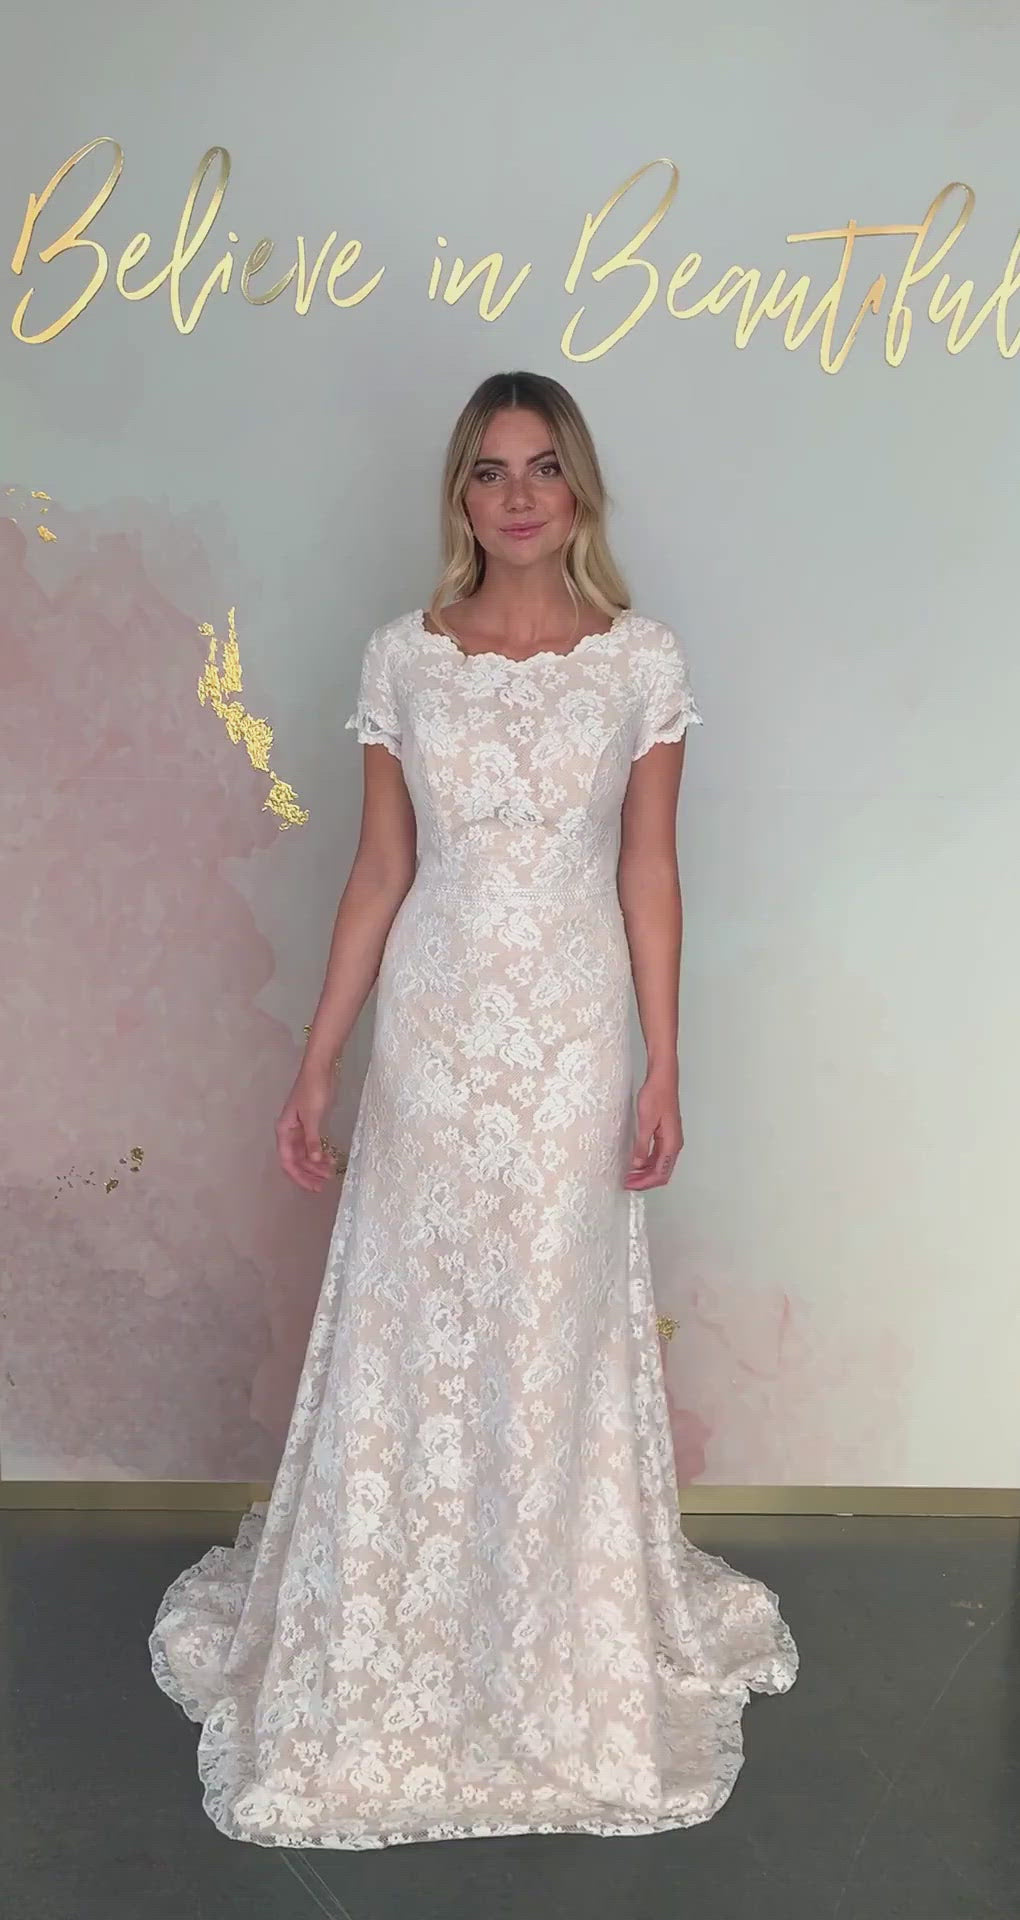 A video featuring our Hazel wedding dress and its scalloped lace detailing along the sleeves and neckline, and its flattering subtle A-line fit.